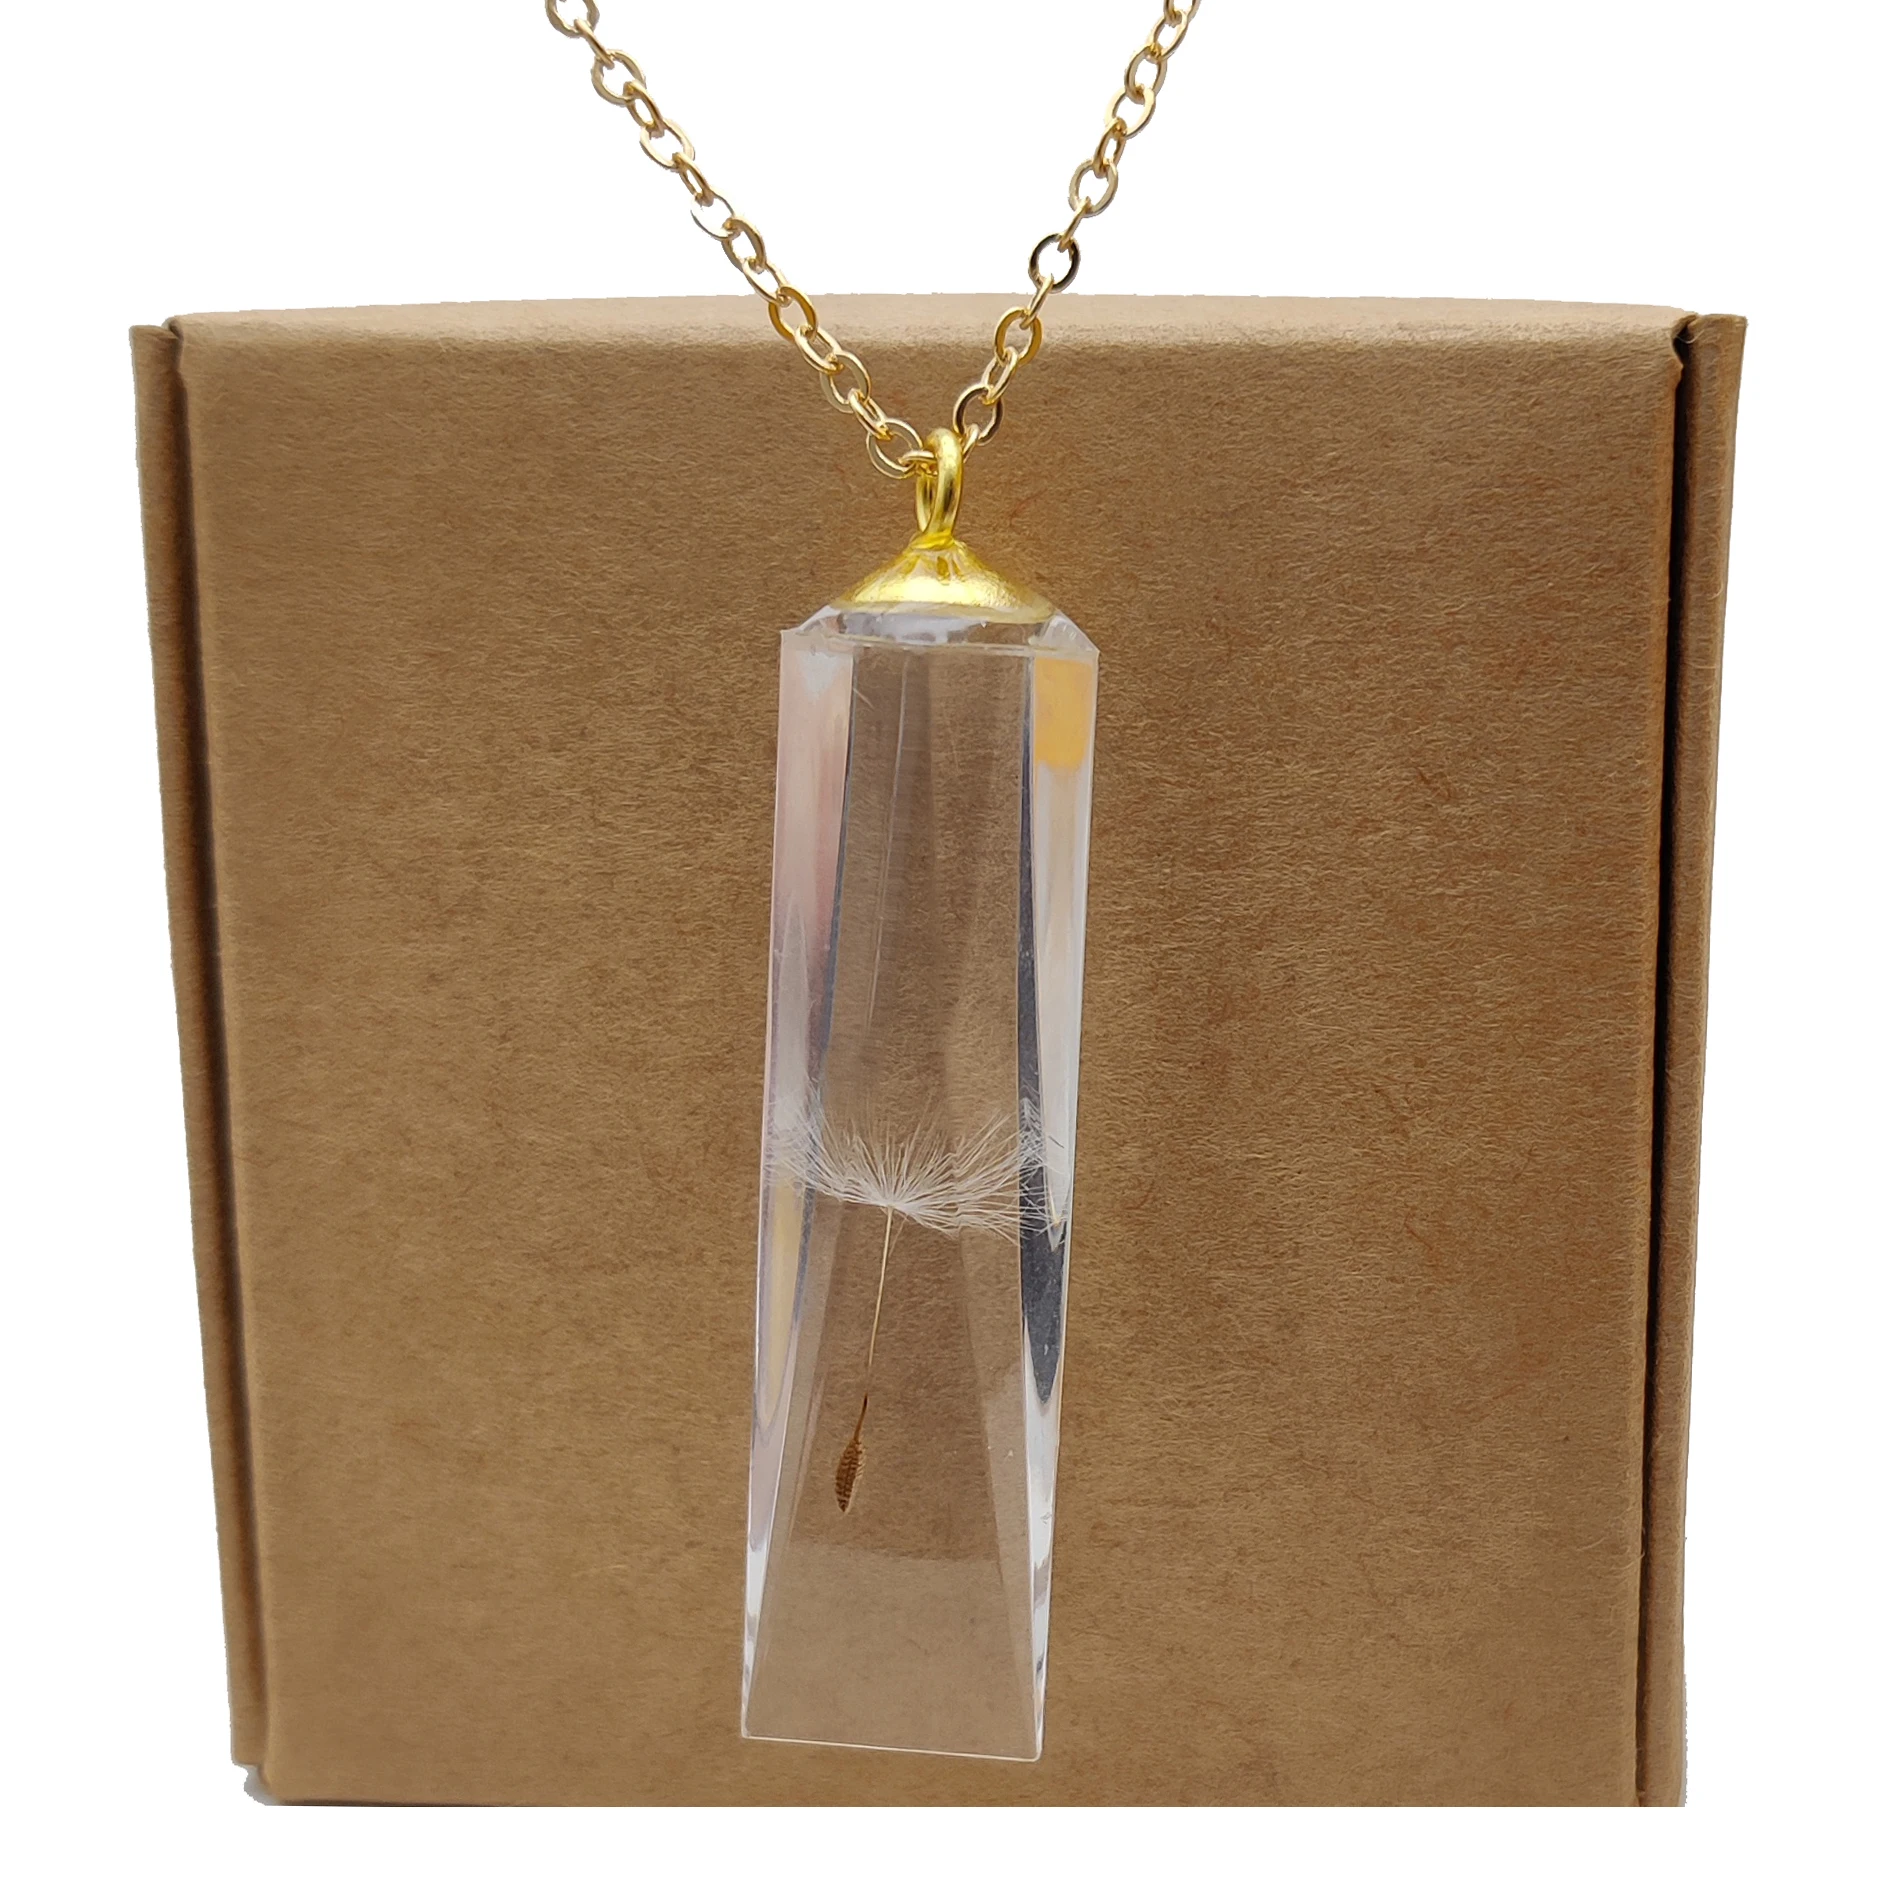 Dandelion Make a Wish Sliced Mirror Cuboid Resin Gold Color Pendant Chain Long Necklace Women Boho Jewelry Bohemian Handmade cuboid resin molds rectangular silicone casting moulds reusable epoxy mould 264e